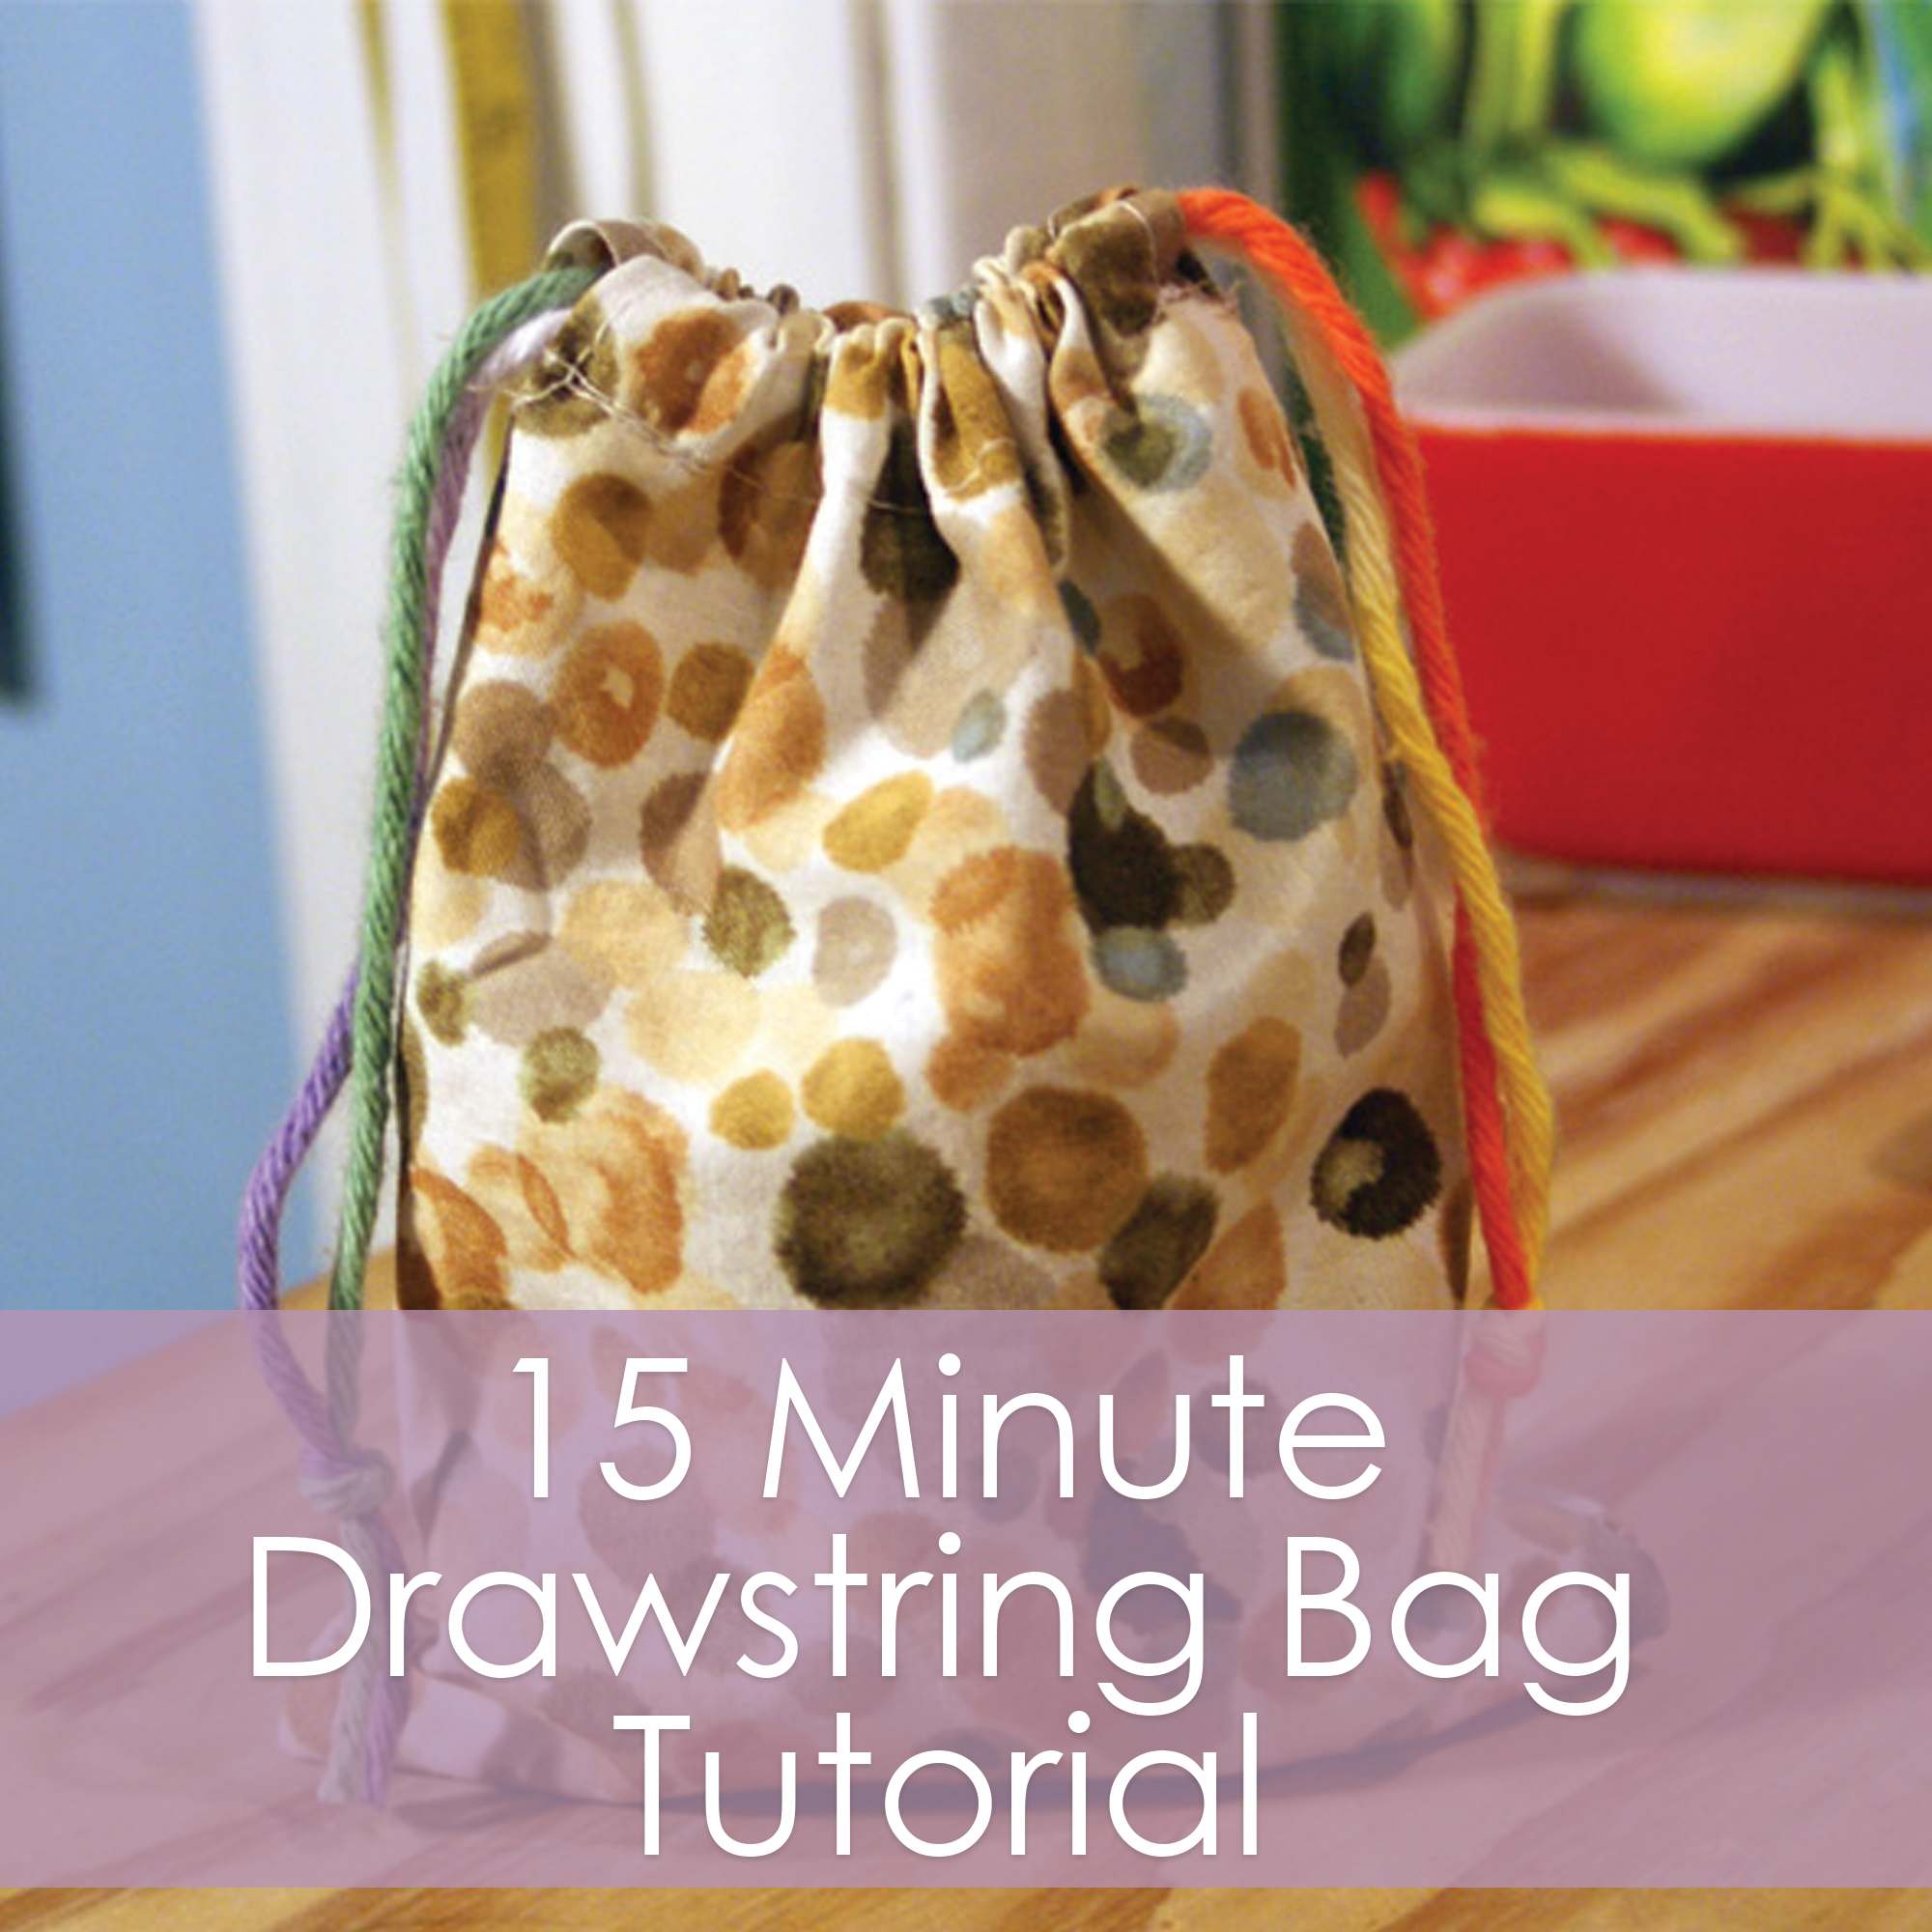 How to Sew Drawstring Bags, Sewing Tutorial